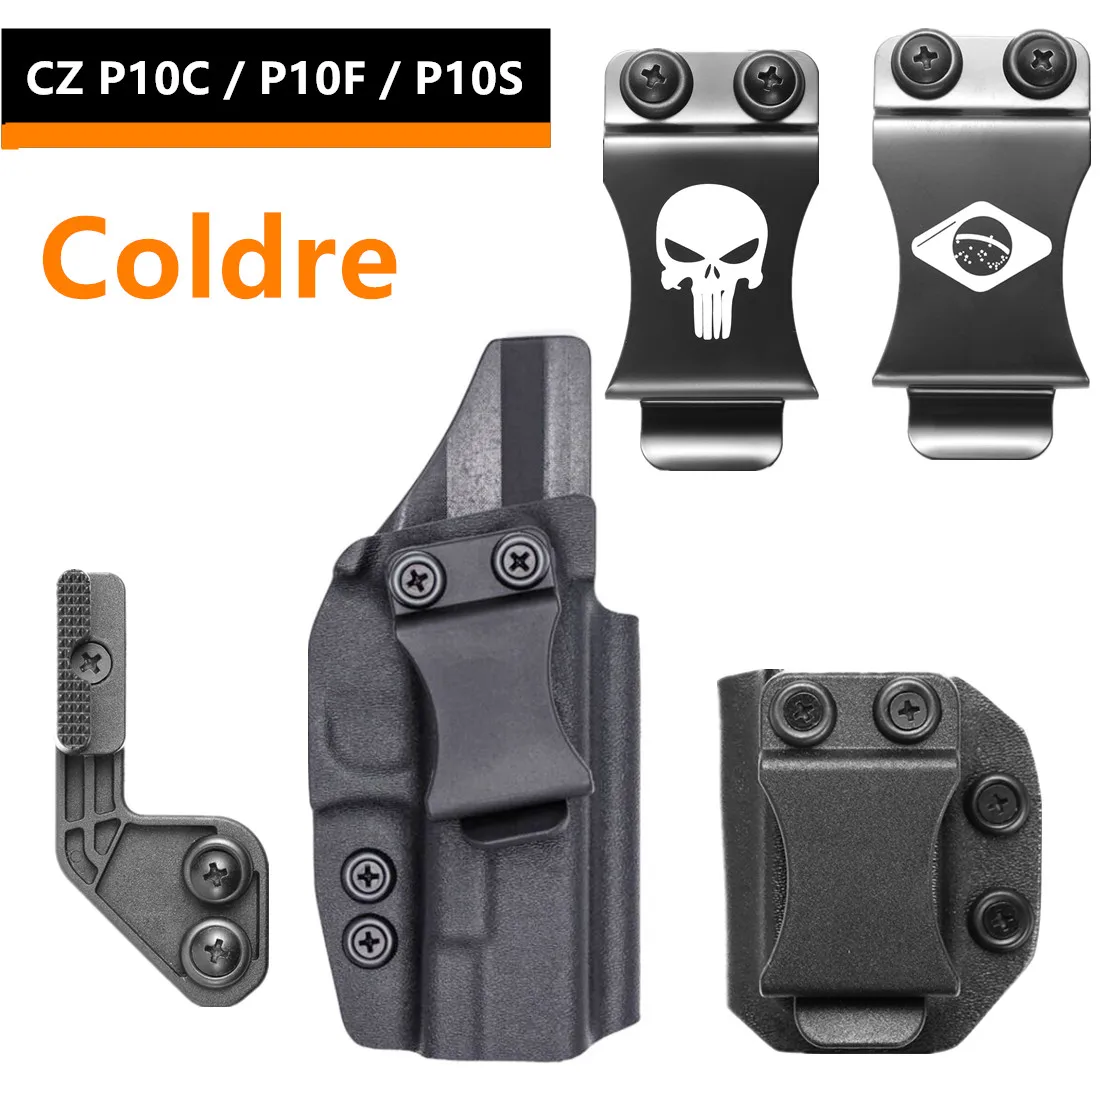 Kydex Internal Holster For CZ P10C P10F P10 C F S Compact Full Size Red Dot Optic Concealment Steel Clip Claw Concealed Carry